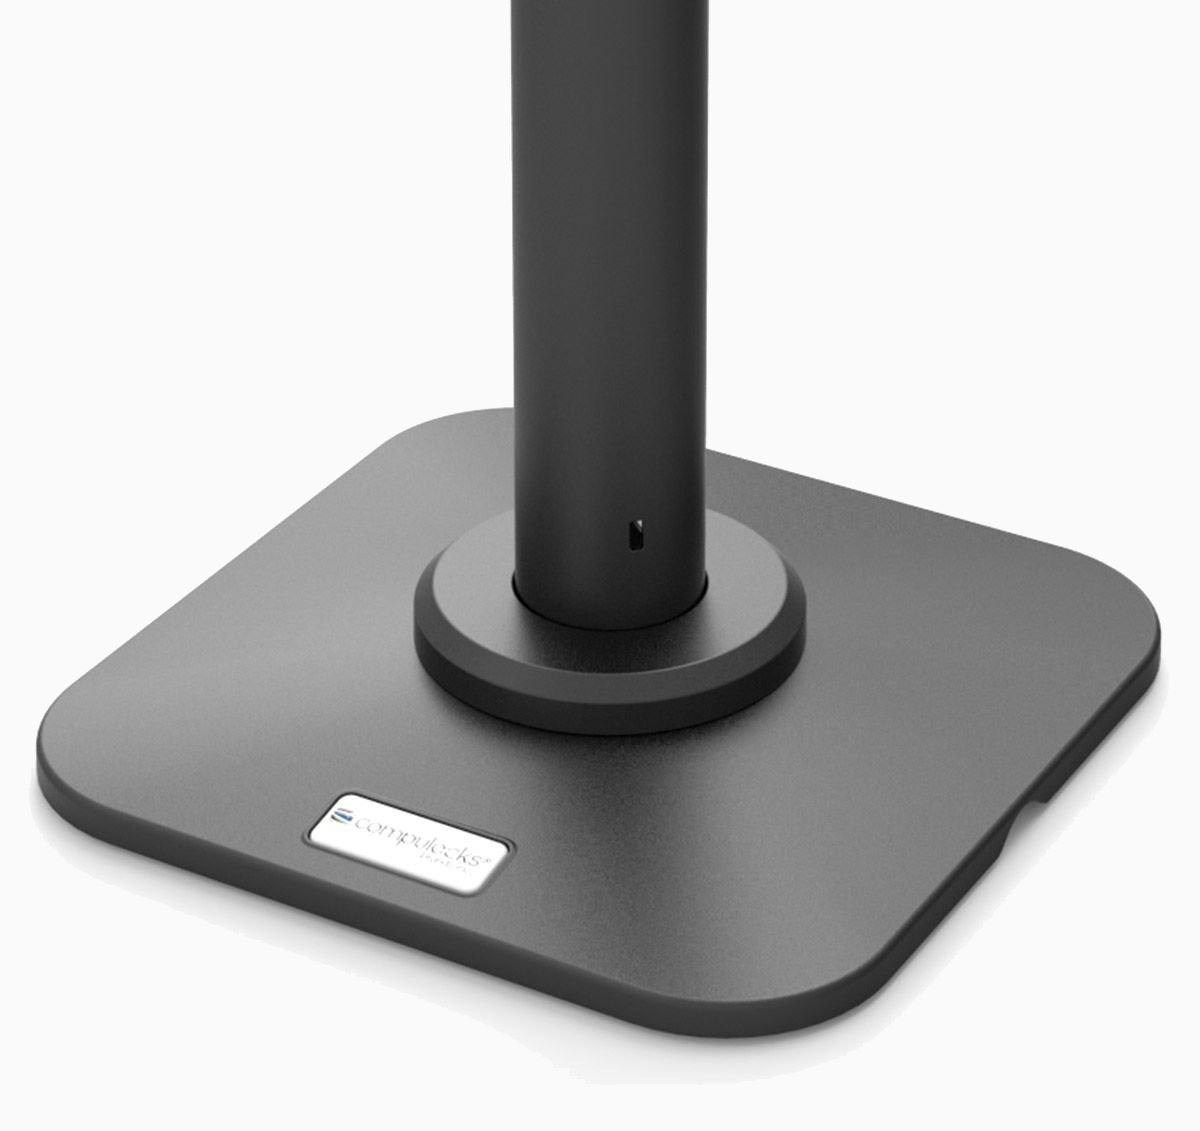 Tabletop tablet holder - THE RISE SPACE DUAL - Maclocks / Compulocks -  commercial / horizontal / secure